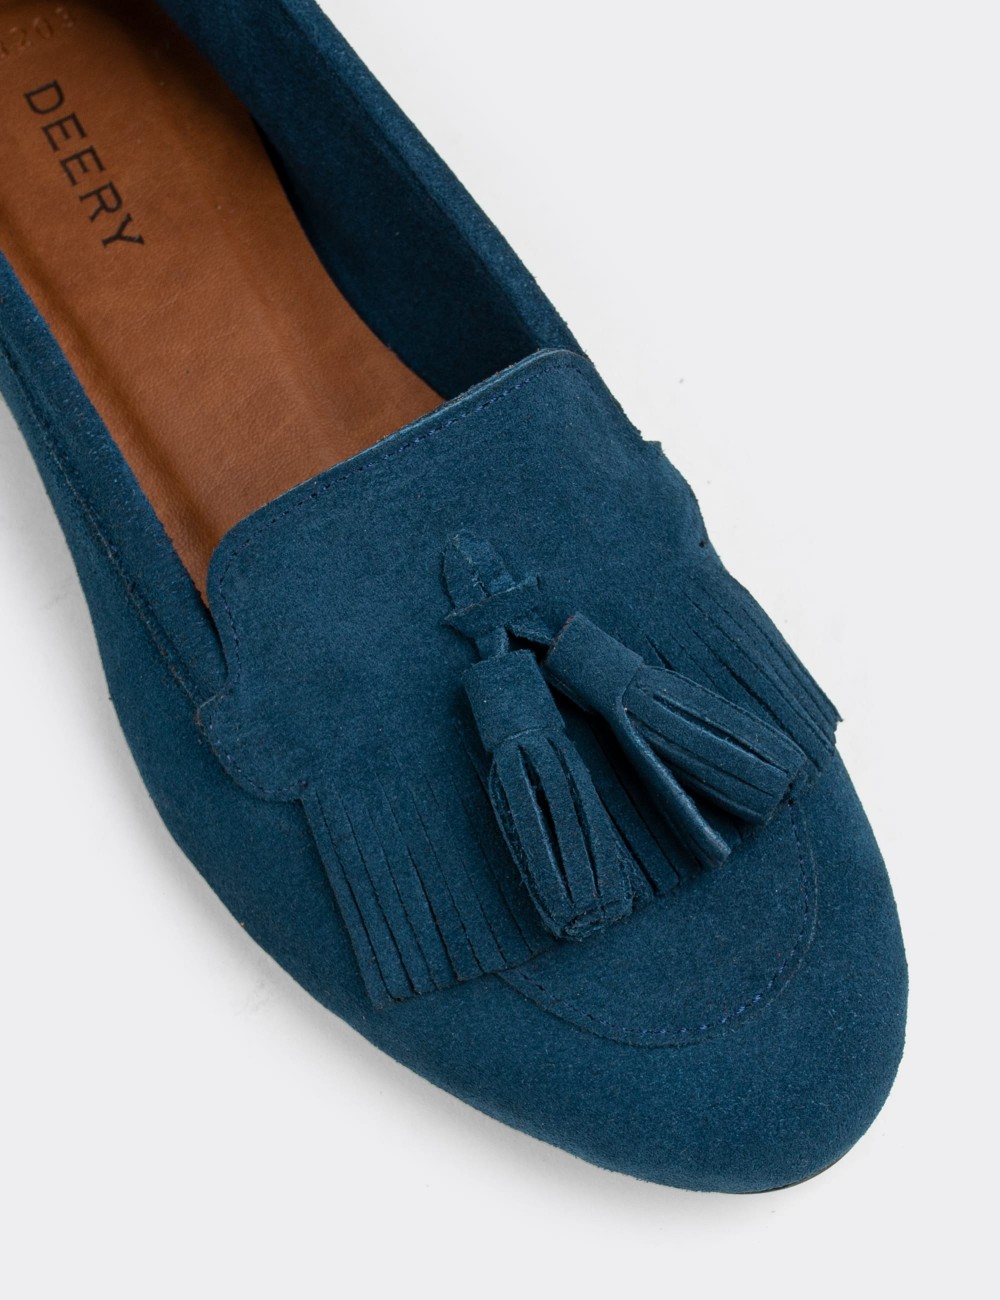 Blue Suede Leather Loafers - E3203ZMVIC01